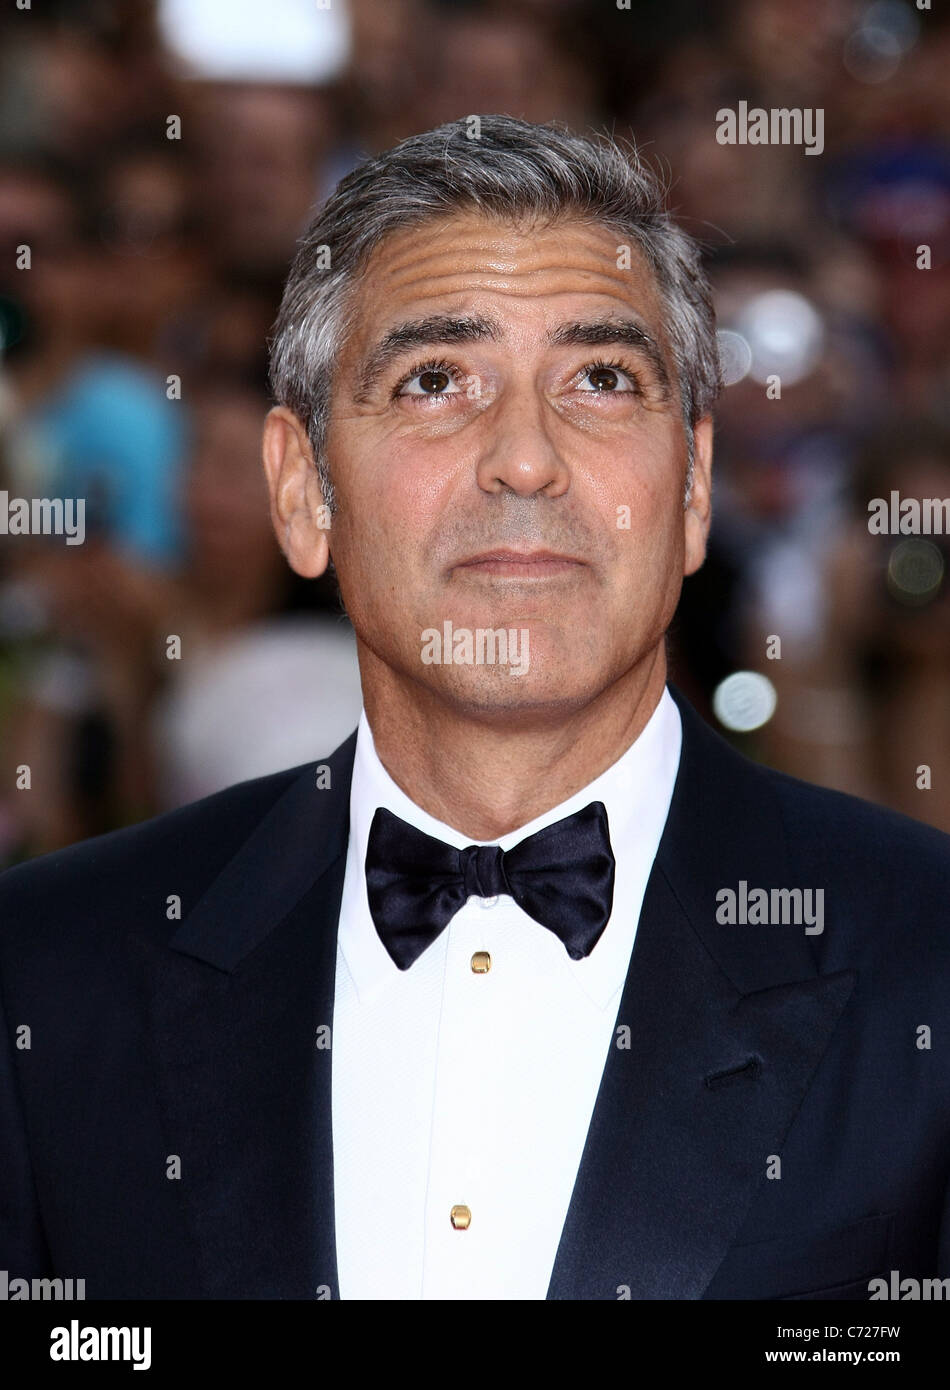 GEORGE CLOONEY THE IDES OF MARCH PREMIERE. 68TH VENICE FILM FESTIVAL LIDO VENICE  ITALY 31 August 2011 Stock Photo